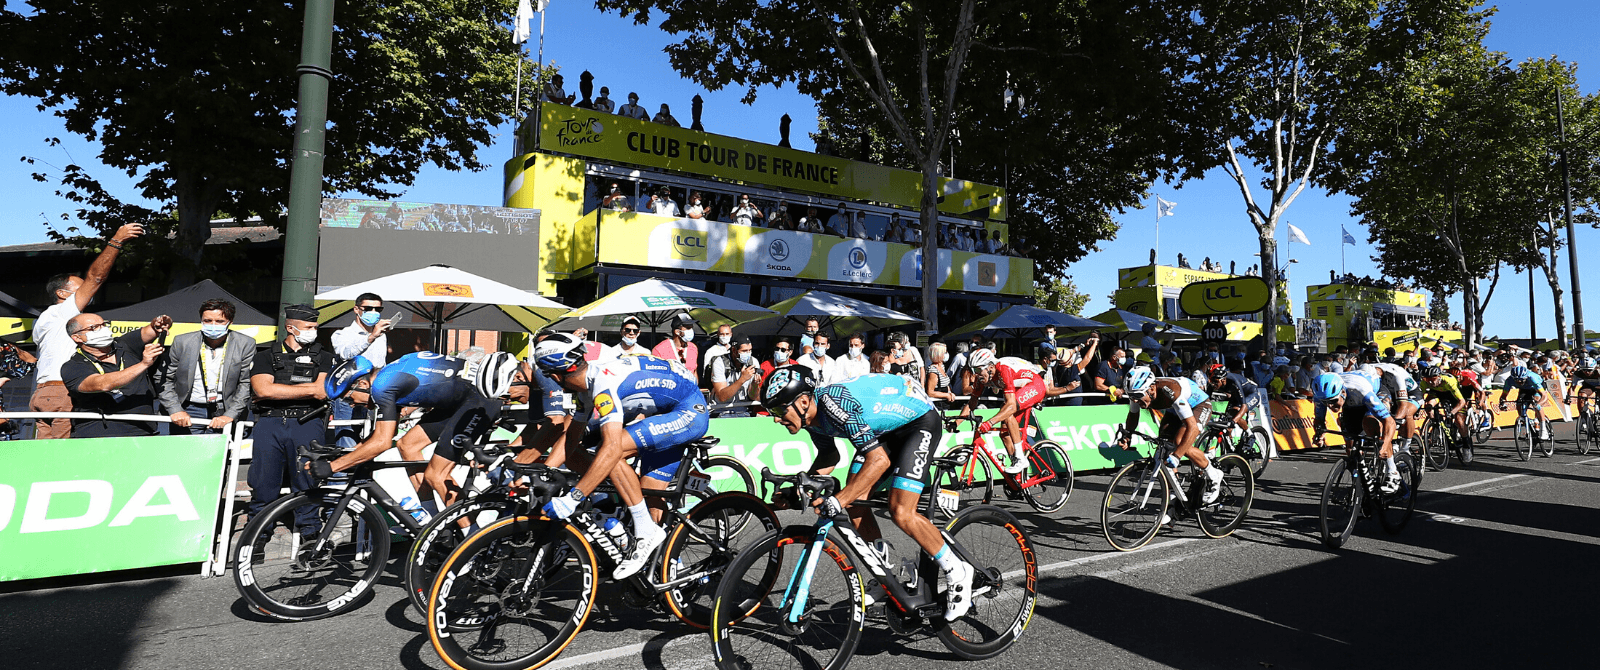 Cyclists sprinting in front of the Club Tour de France stall